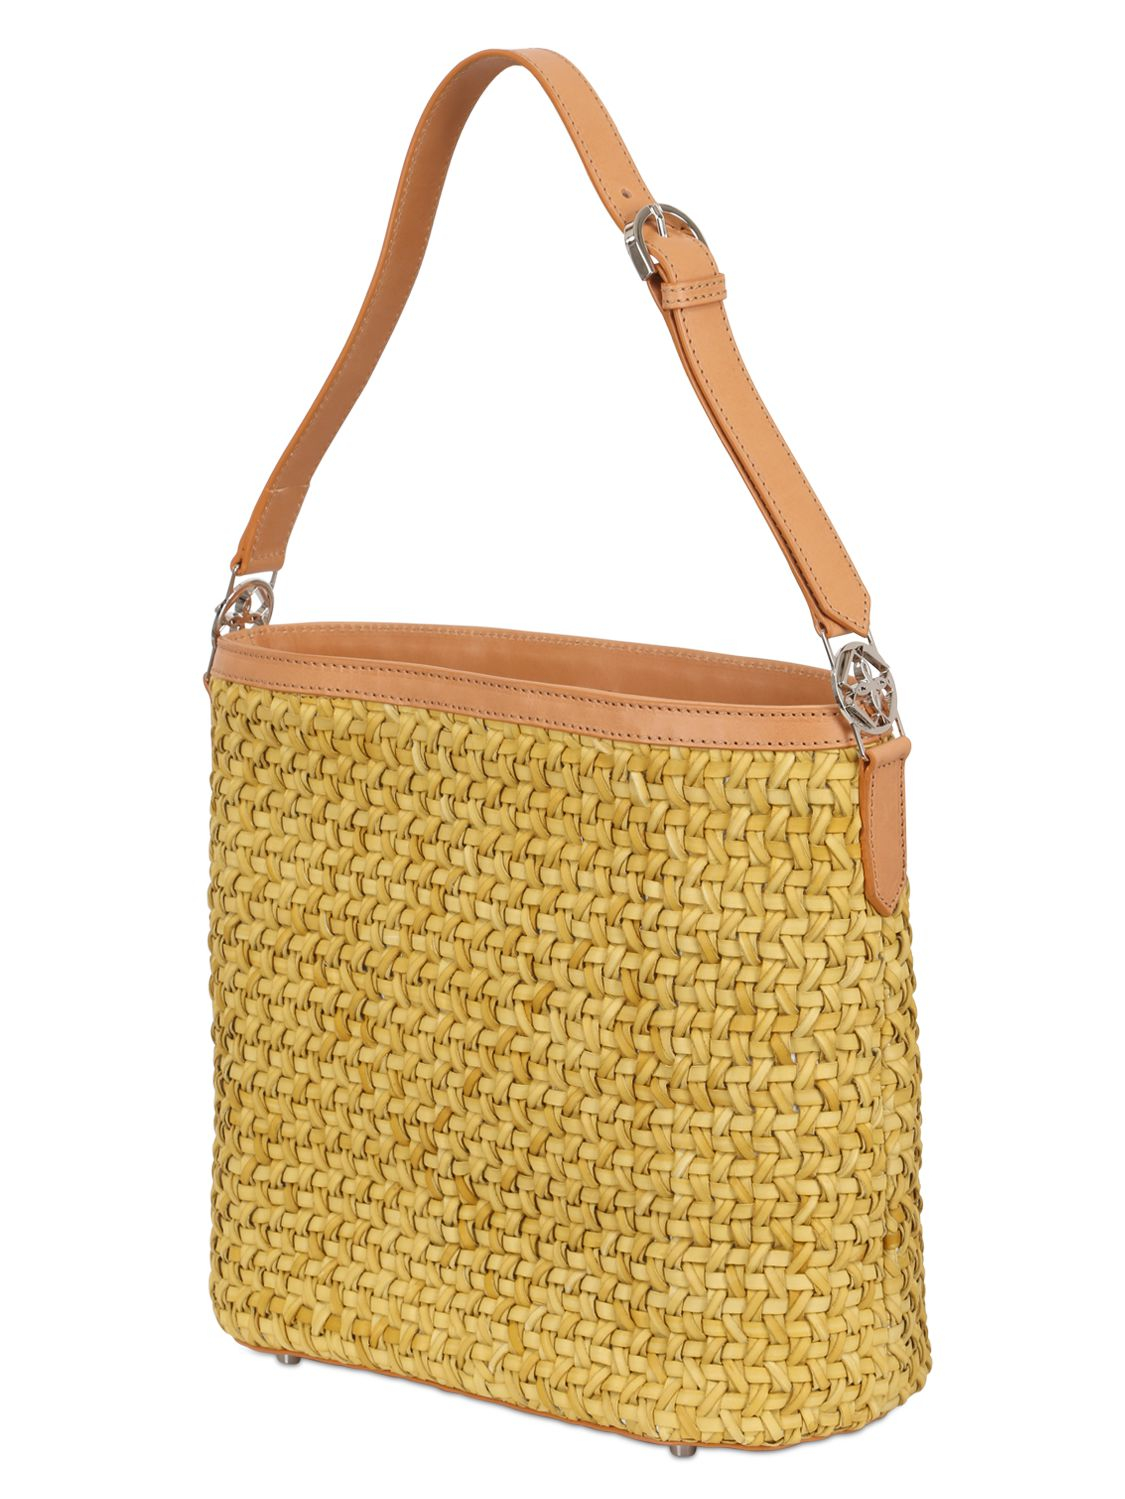 Lyst - Desmo Woven Leather Shoulder Bag in Yellow